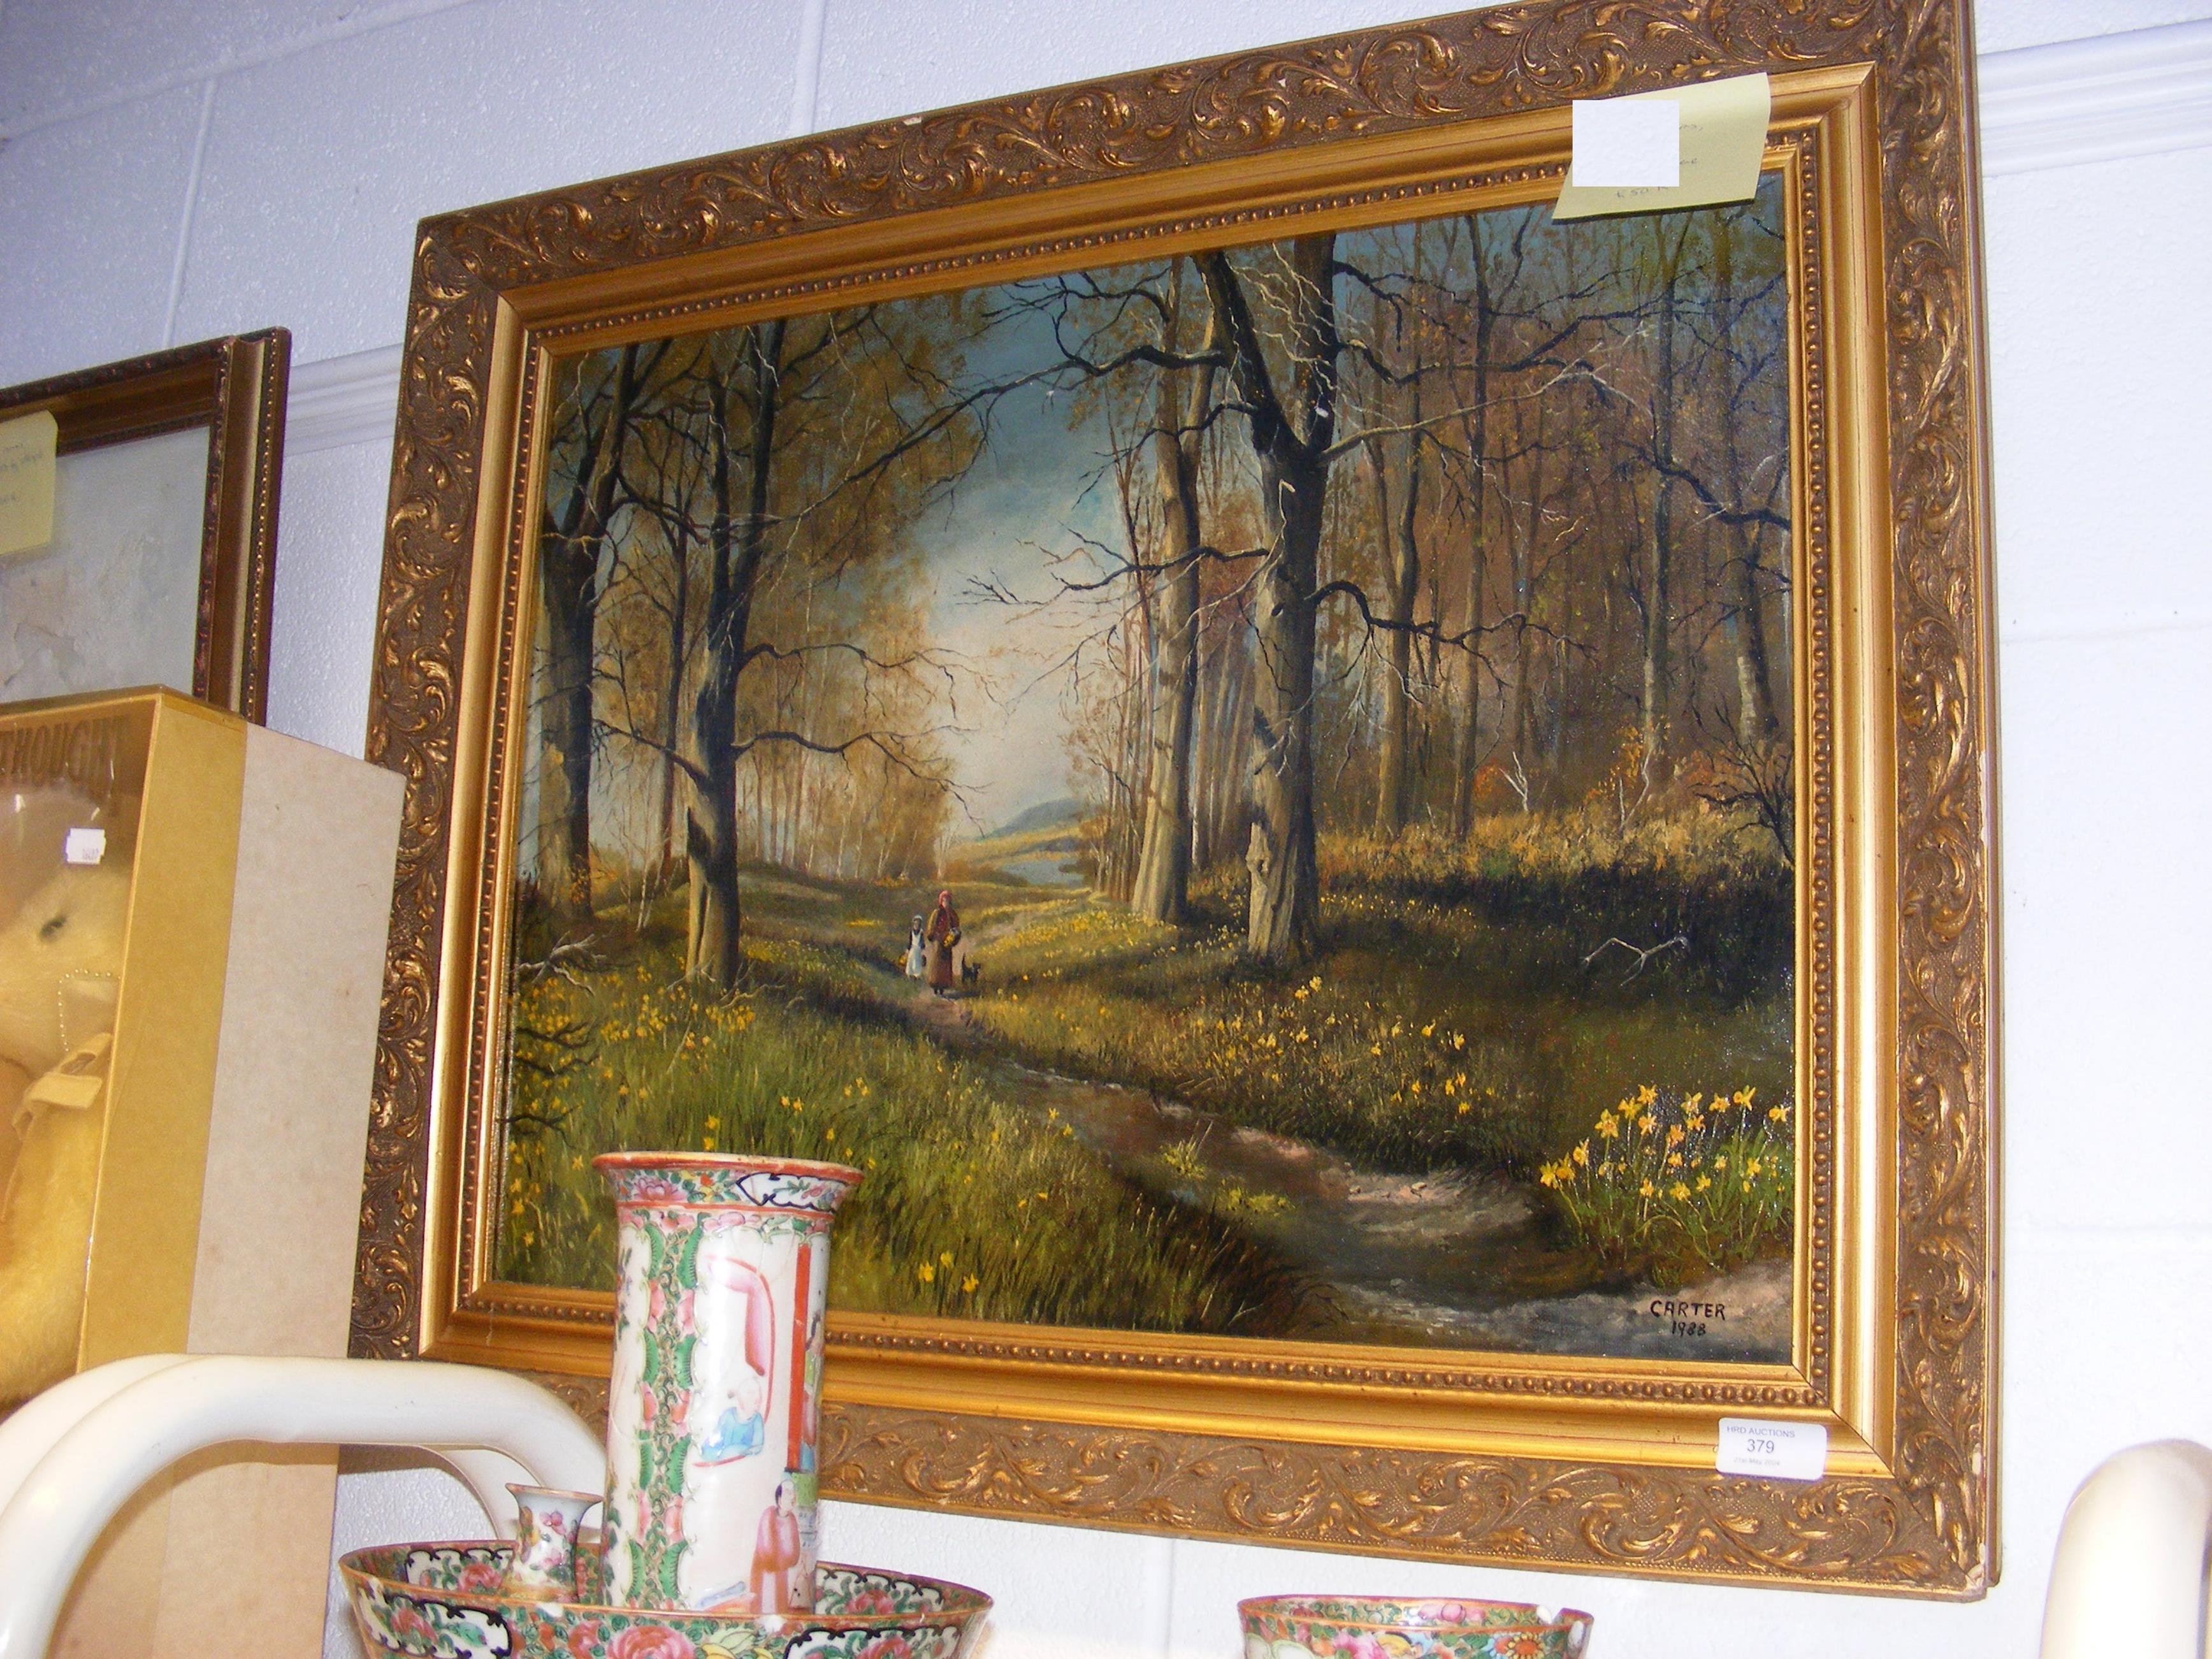 An oil on canvas of woodland scene - signed CARTER